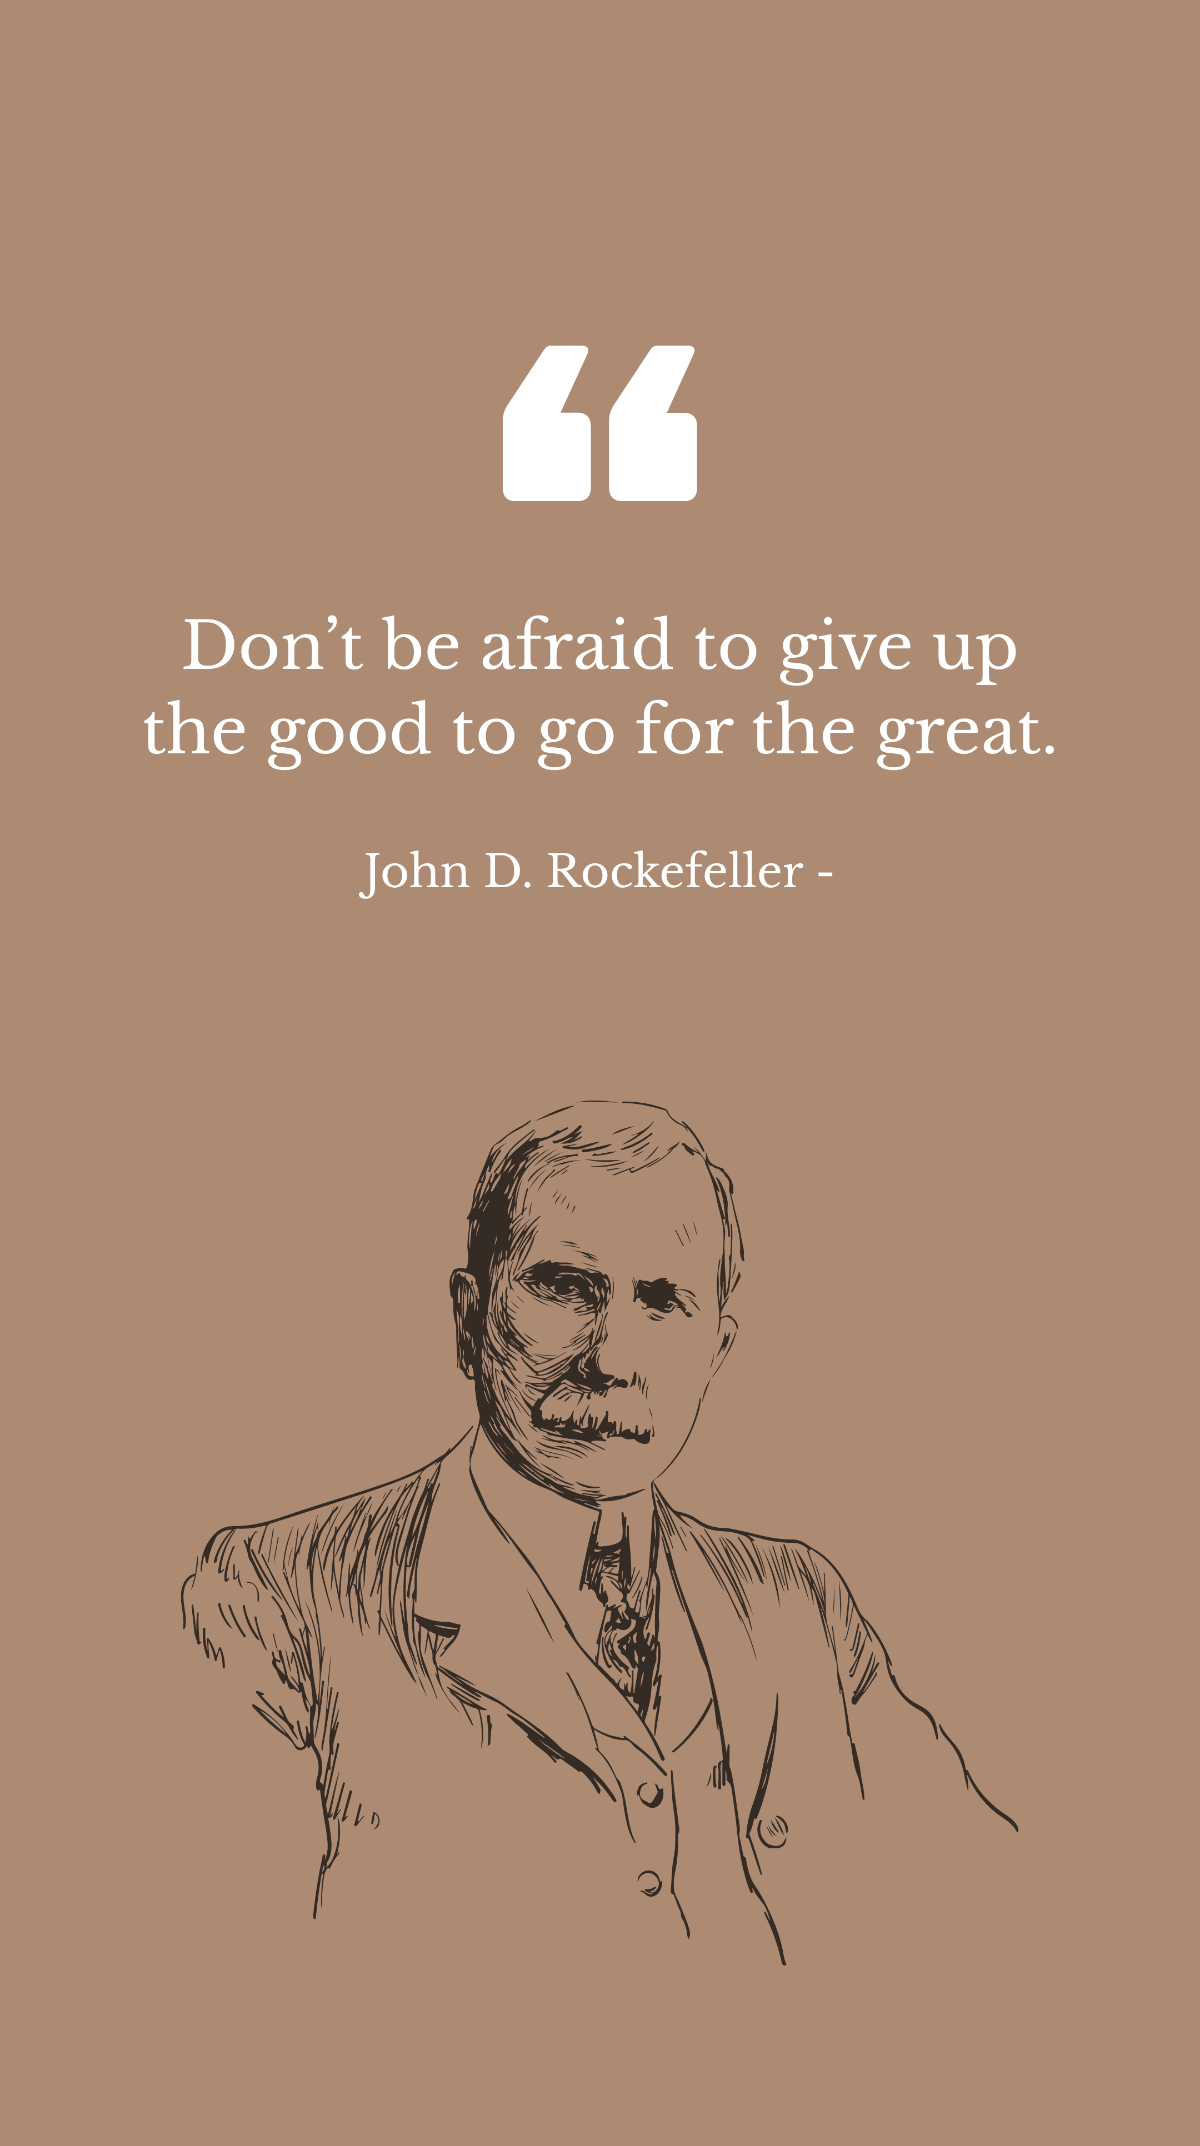 Free John D. Rockefeller - Don’t be afraid to give up the good to go for the great. Template